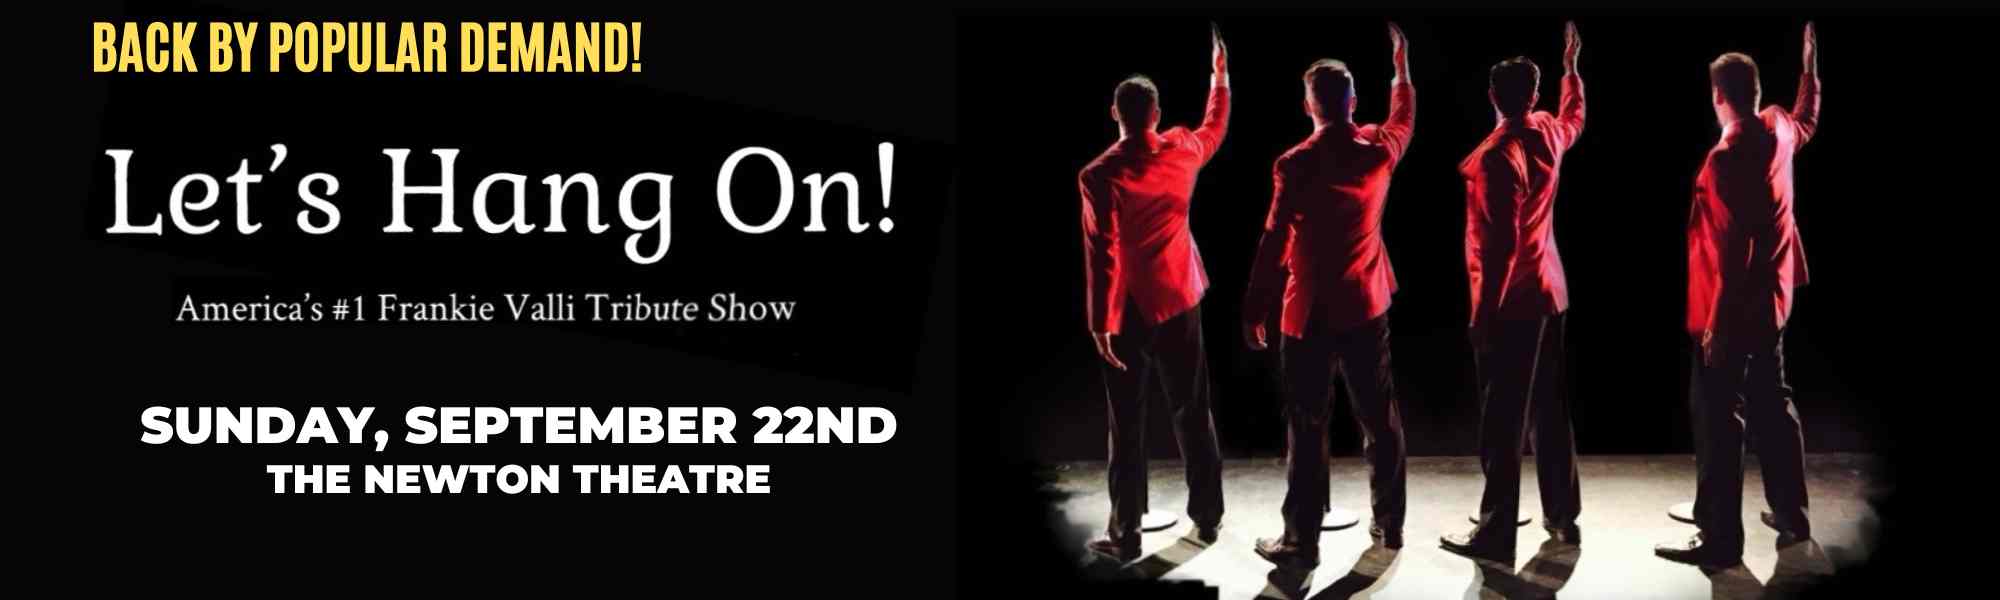 Let's Hang On! comes to The Newton Theatre on Sunday, September 22nd.